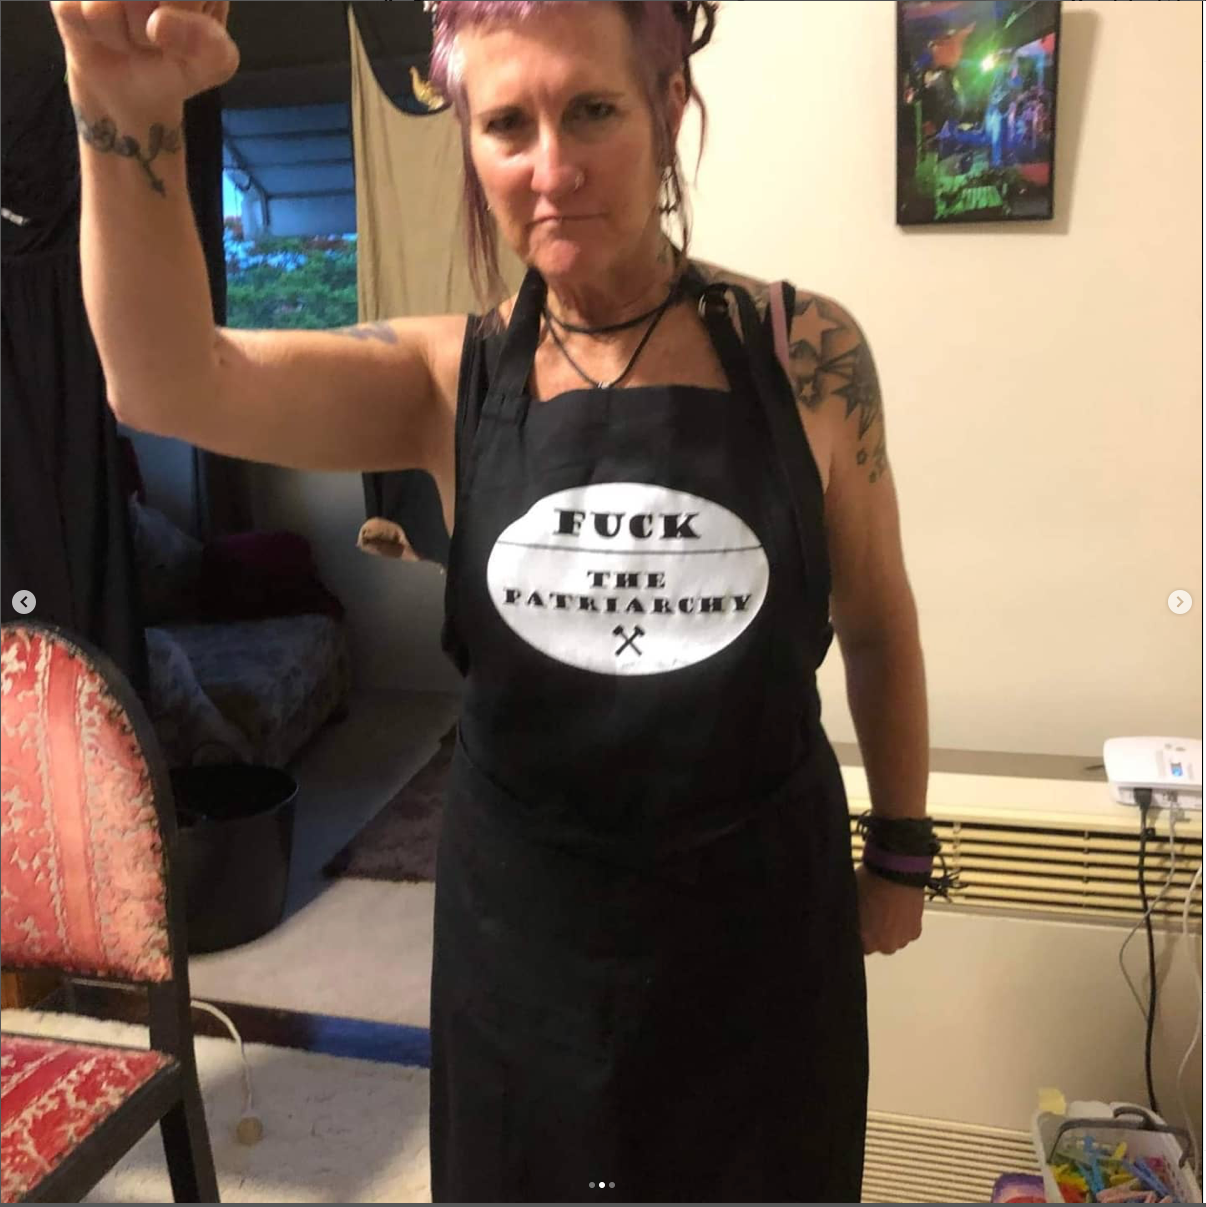 Apron with “FUCK THE PATRIARCHY” hand screenprint